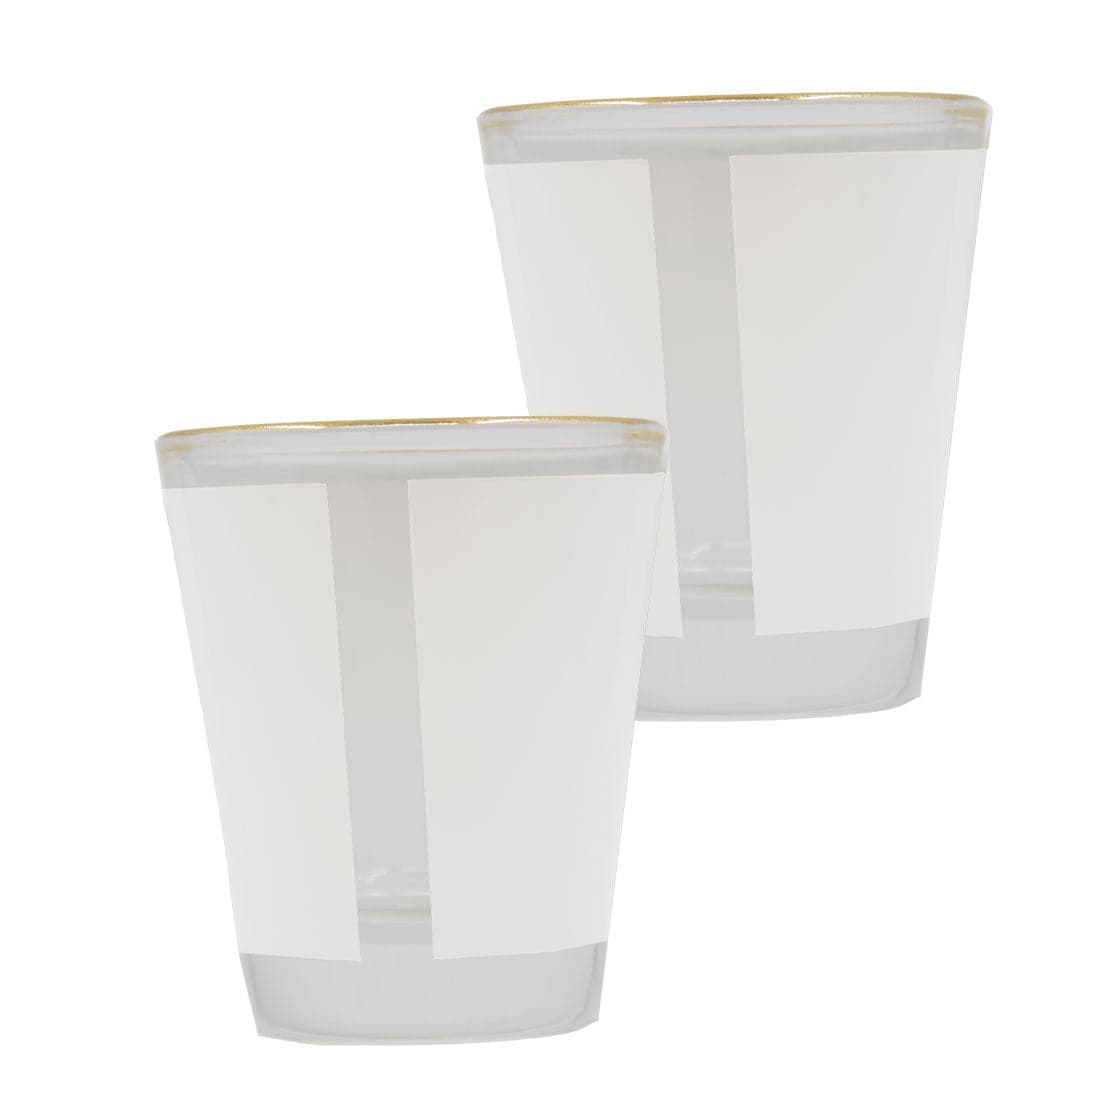 Pearl Coating™ 1.5oz Sublimation Shot Glass with Gold Rim - Pack of 12 - Joto Imaging Supplies US